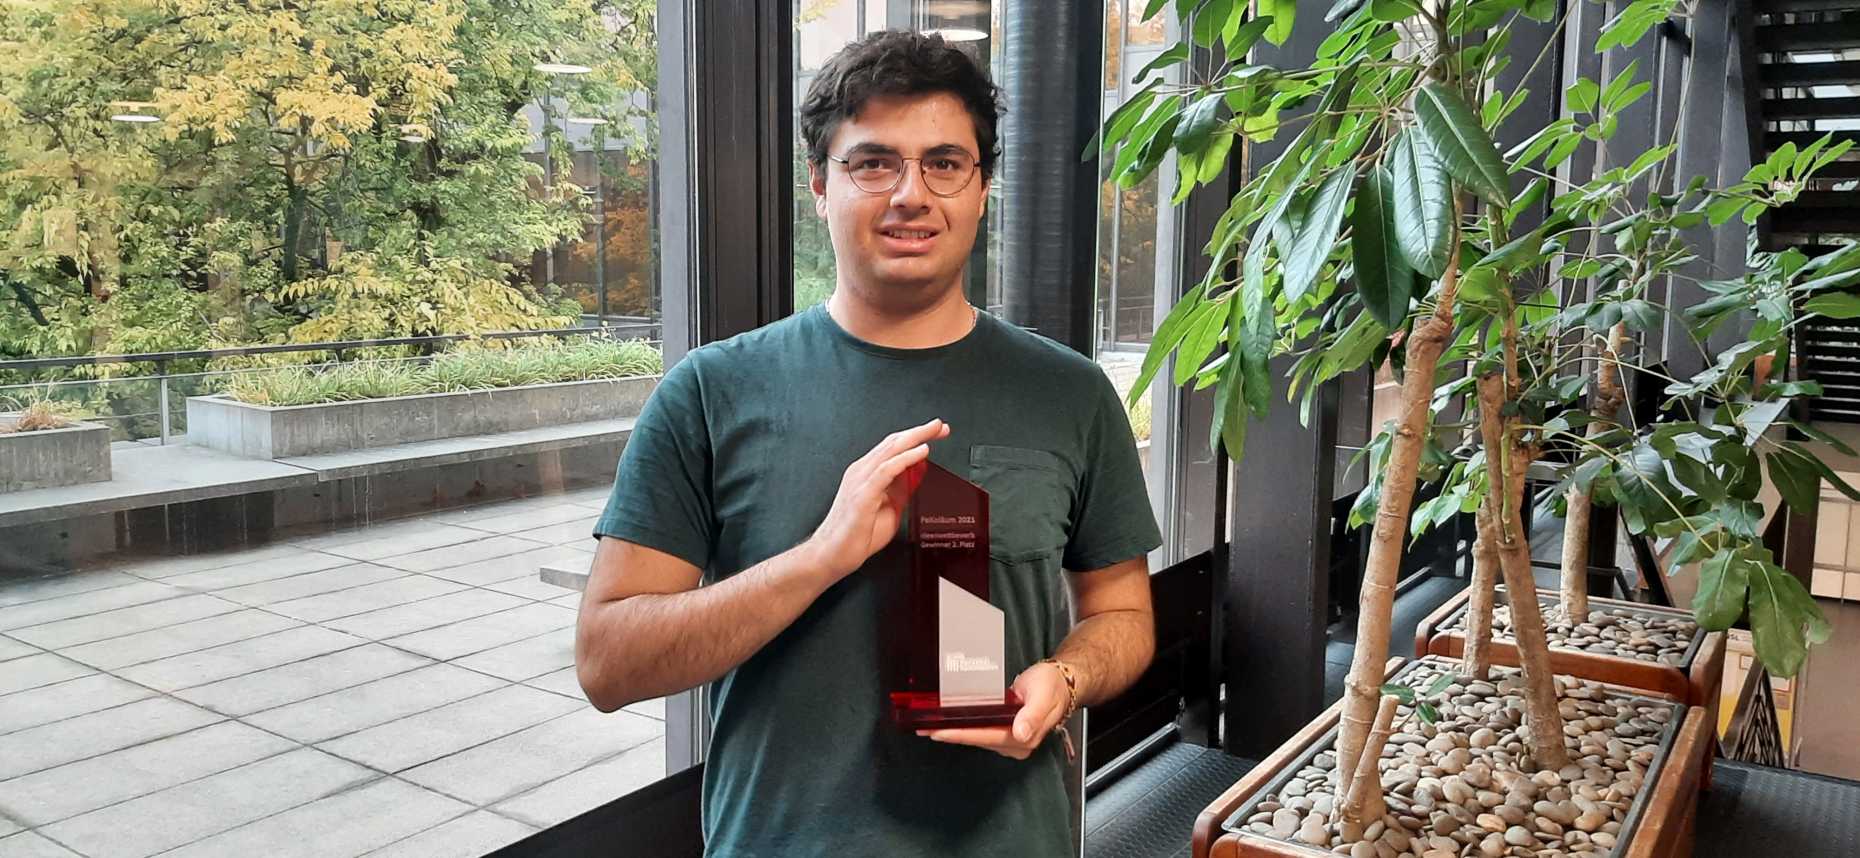 Amirmohammad Miran Zadeh (D-ITET) received second place for his idea to expand the functionality of the ETH card. (Picture: ETH Zurich)